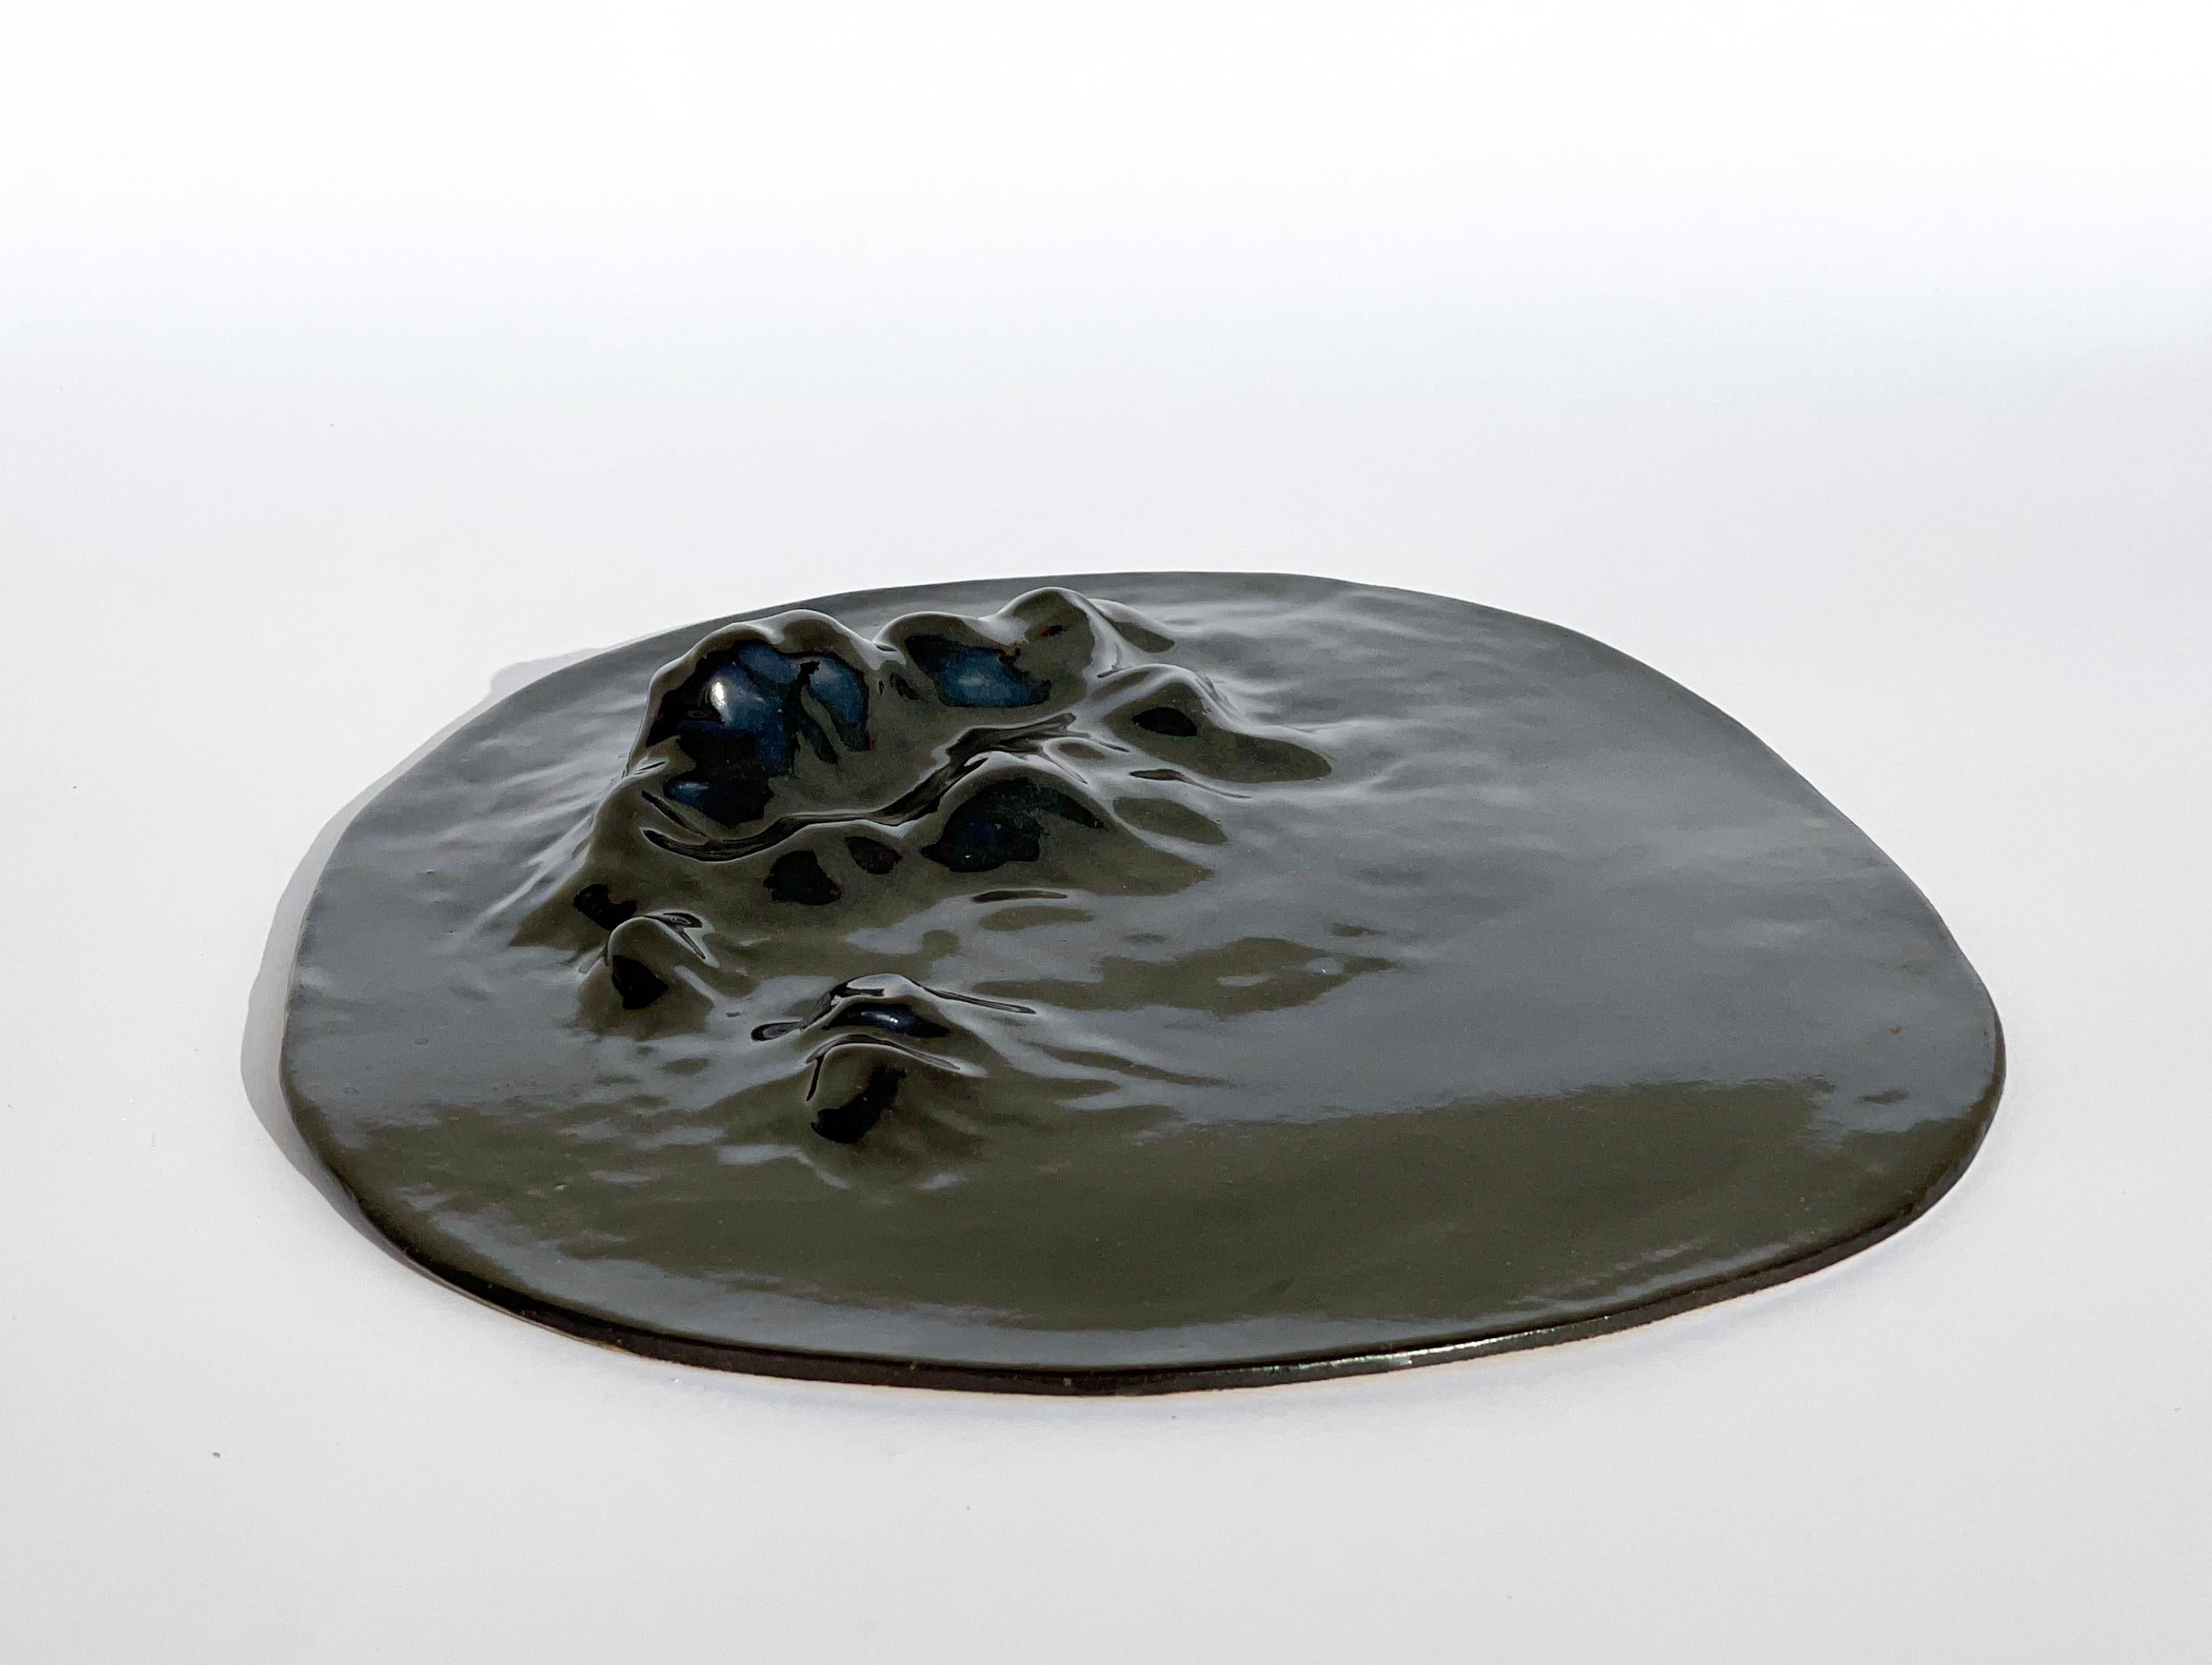 Gongshi plates

Hand made unique undulating form plates, Objet d'Art in Tenmoku glossy finish. 

These sculptural plates are taking inspiration from the Chinese ‘gongshi’
‘Gongshi (Chinese: ??), also known as scholar's rocks, are naturally